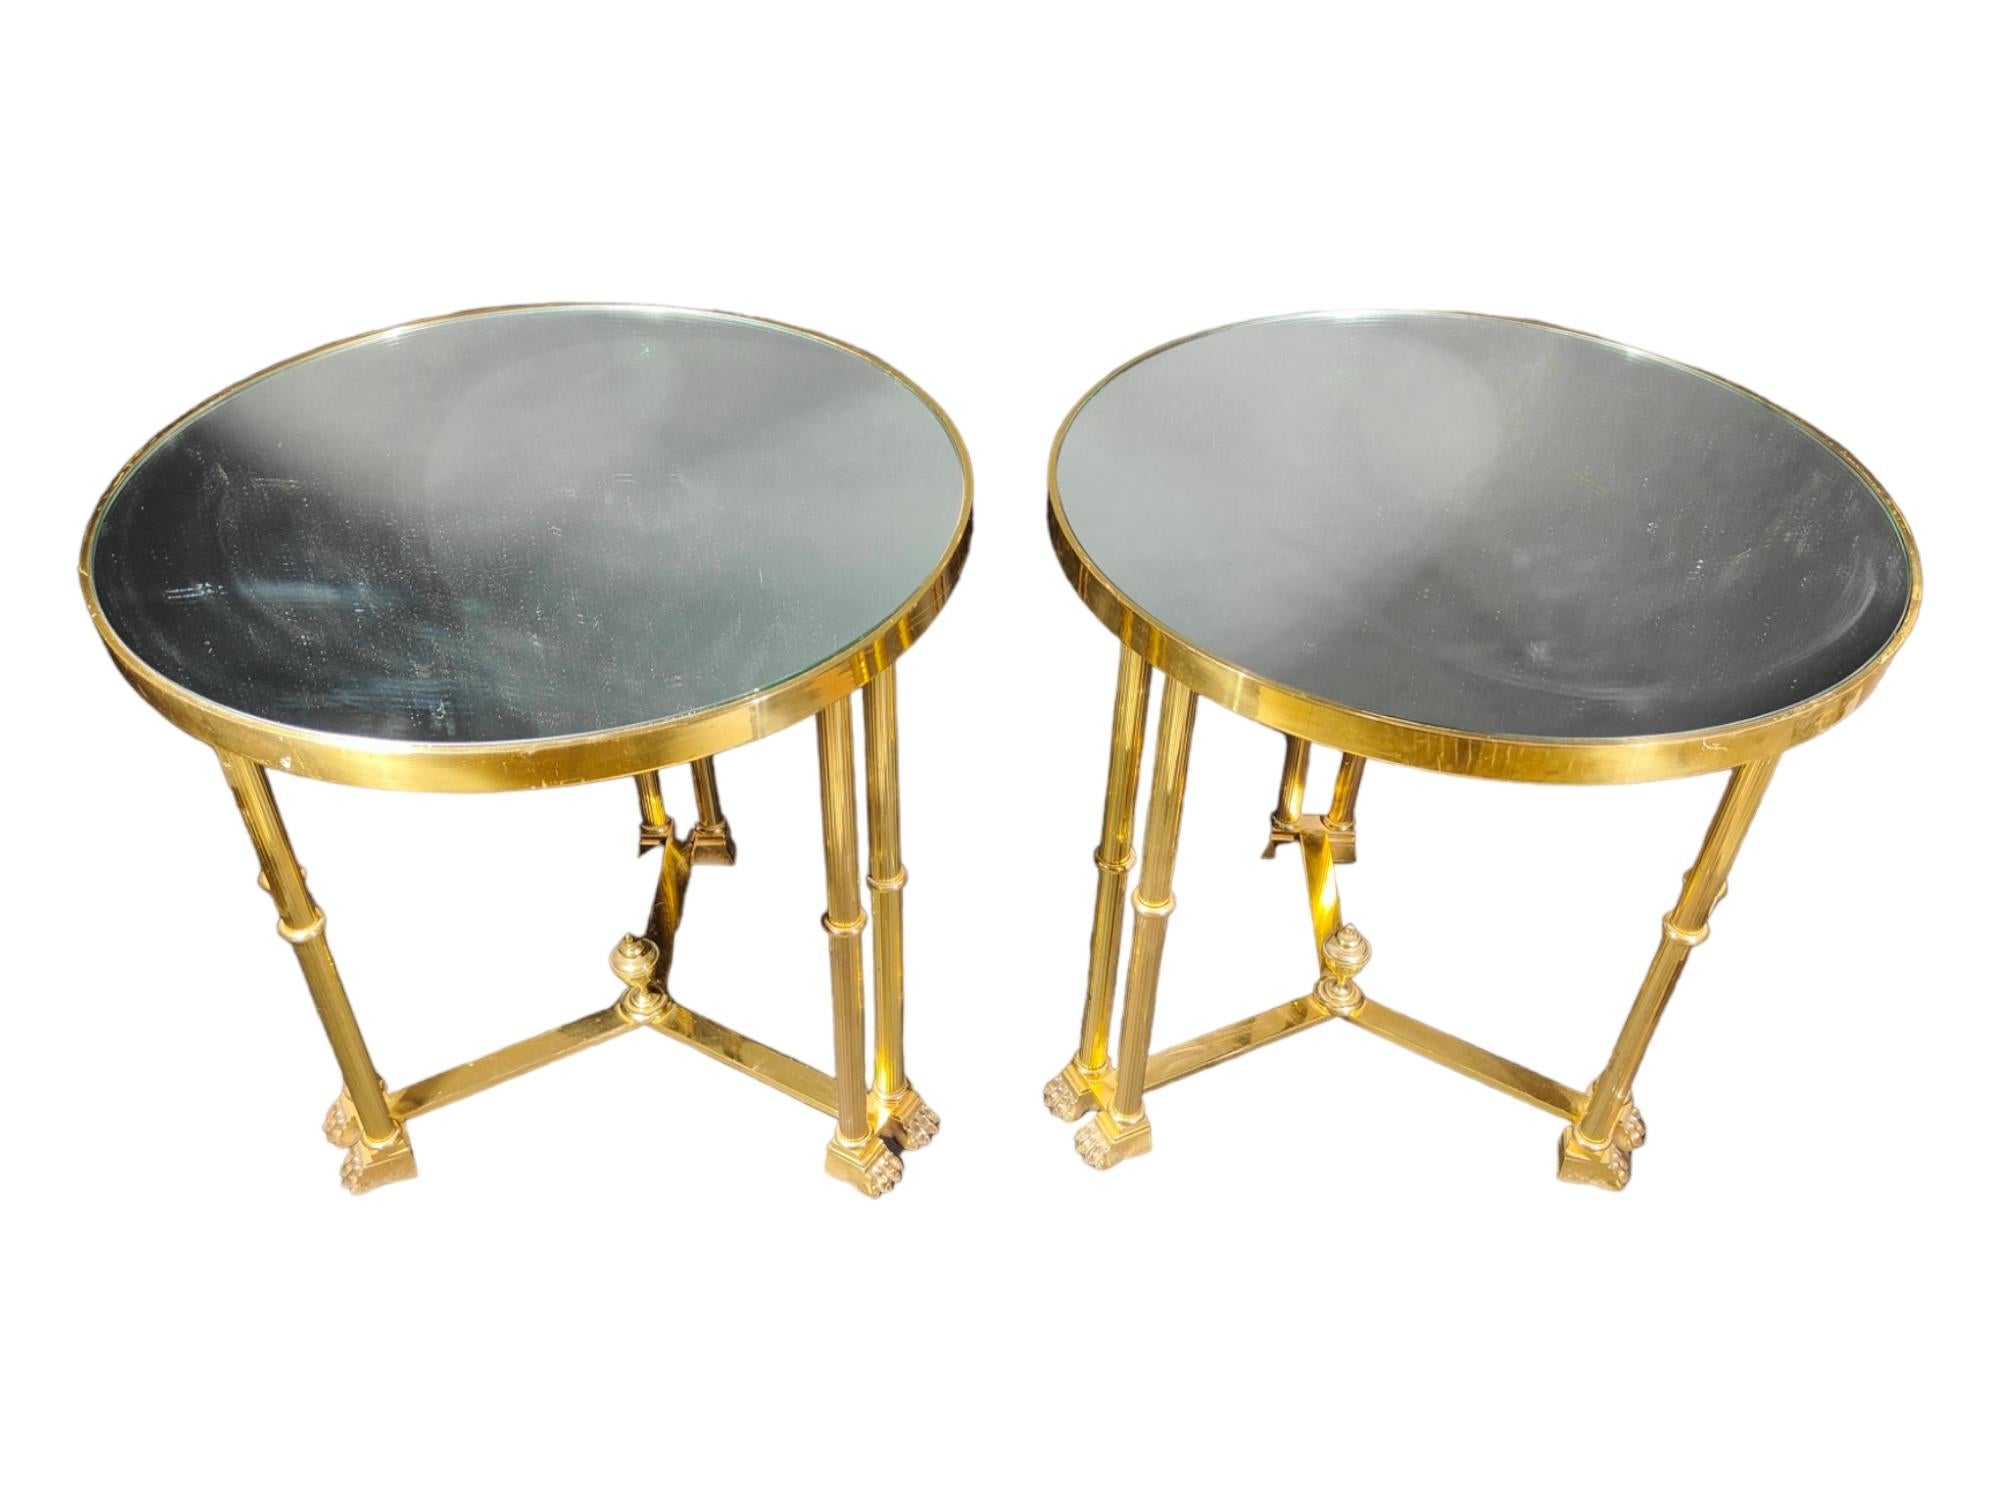 Elegant pair of 1950s Italian empire style tables in golden brass and glass. Measurements: 61 cm in diameter and 60 cm in height.